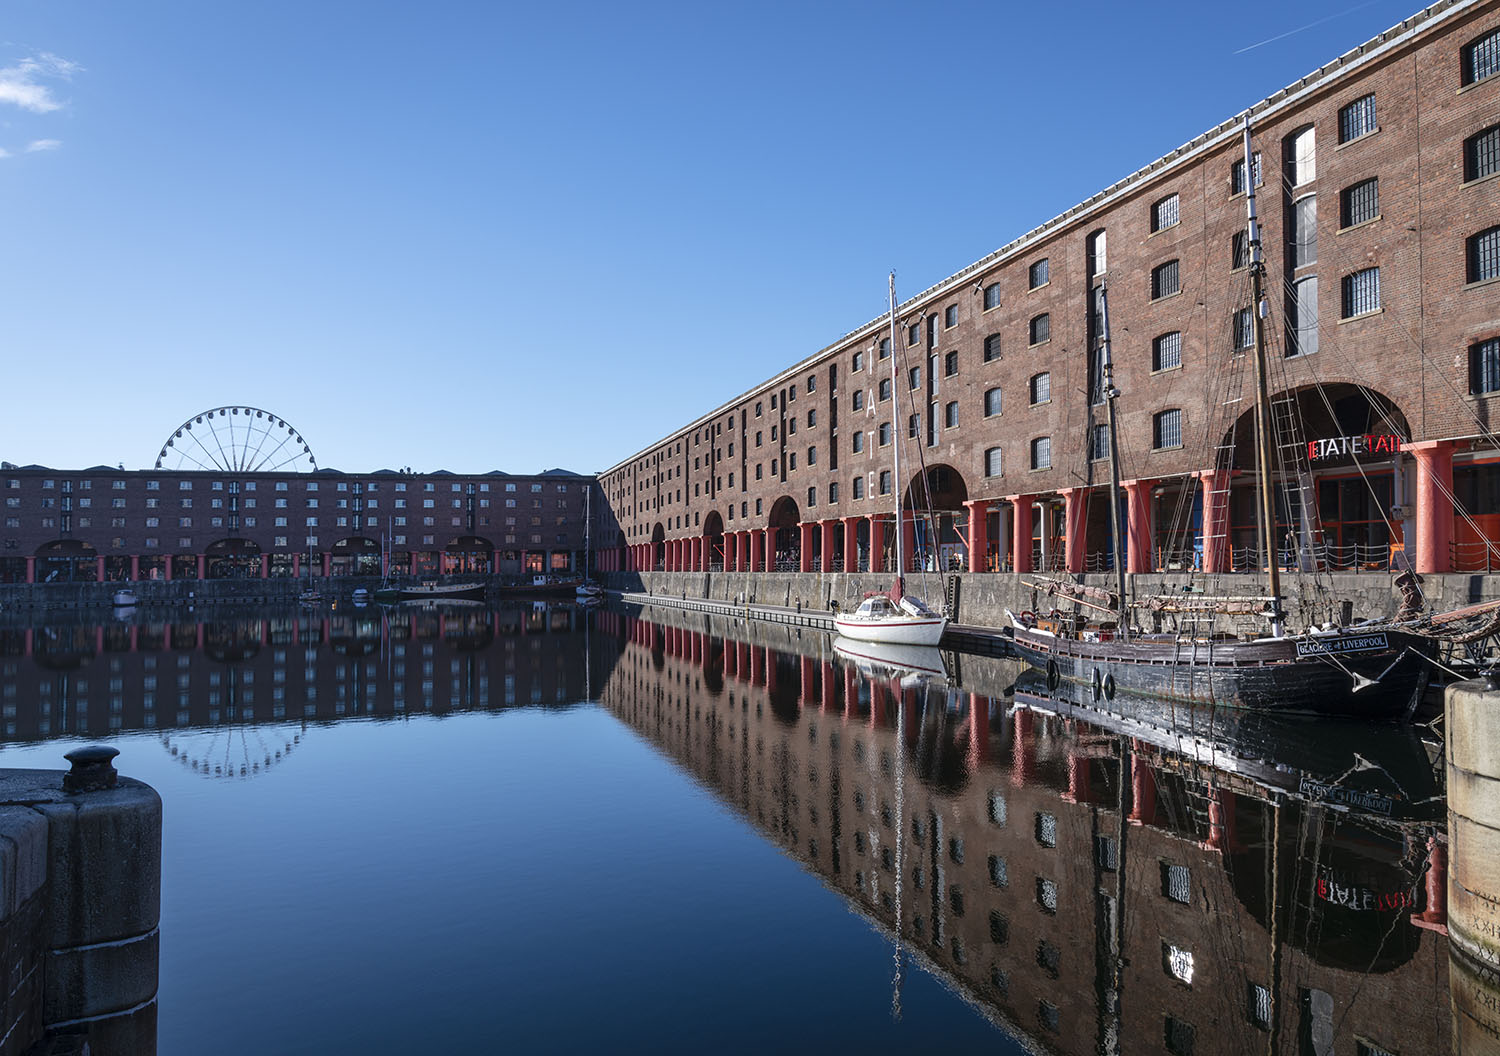 Serene looking scene of still water across the iconic Albert Dock. Traditional boats are moored up in front of the Tate Liverpool art gallery, the Wheel of Liverpool is visible over the tops of the renovated Albert Dock warehouse buildings.